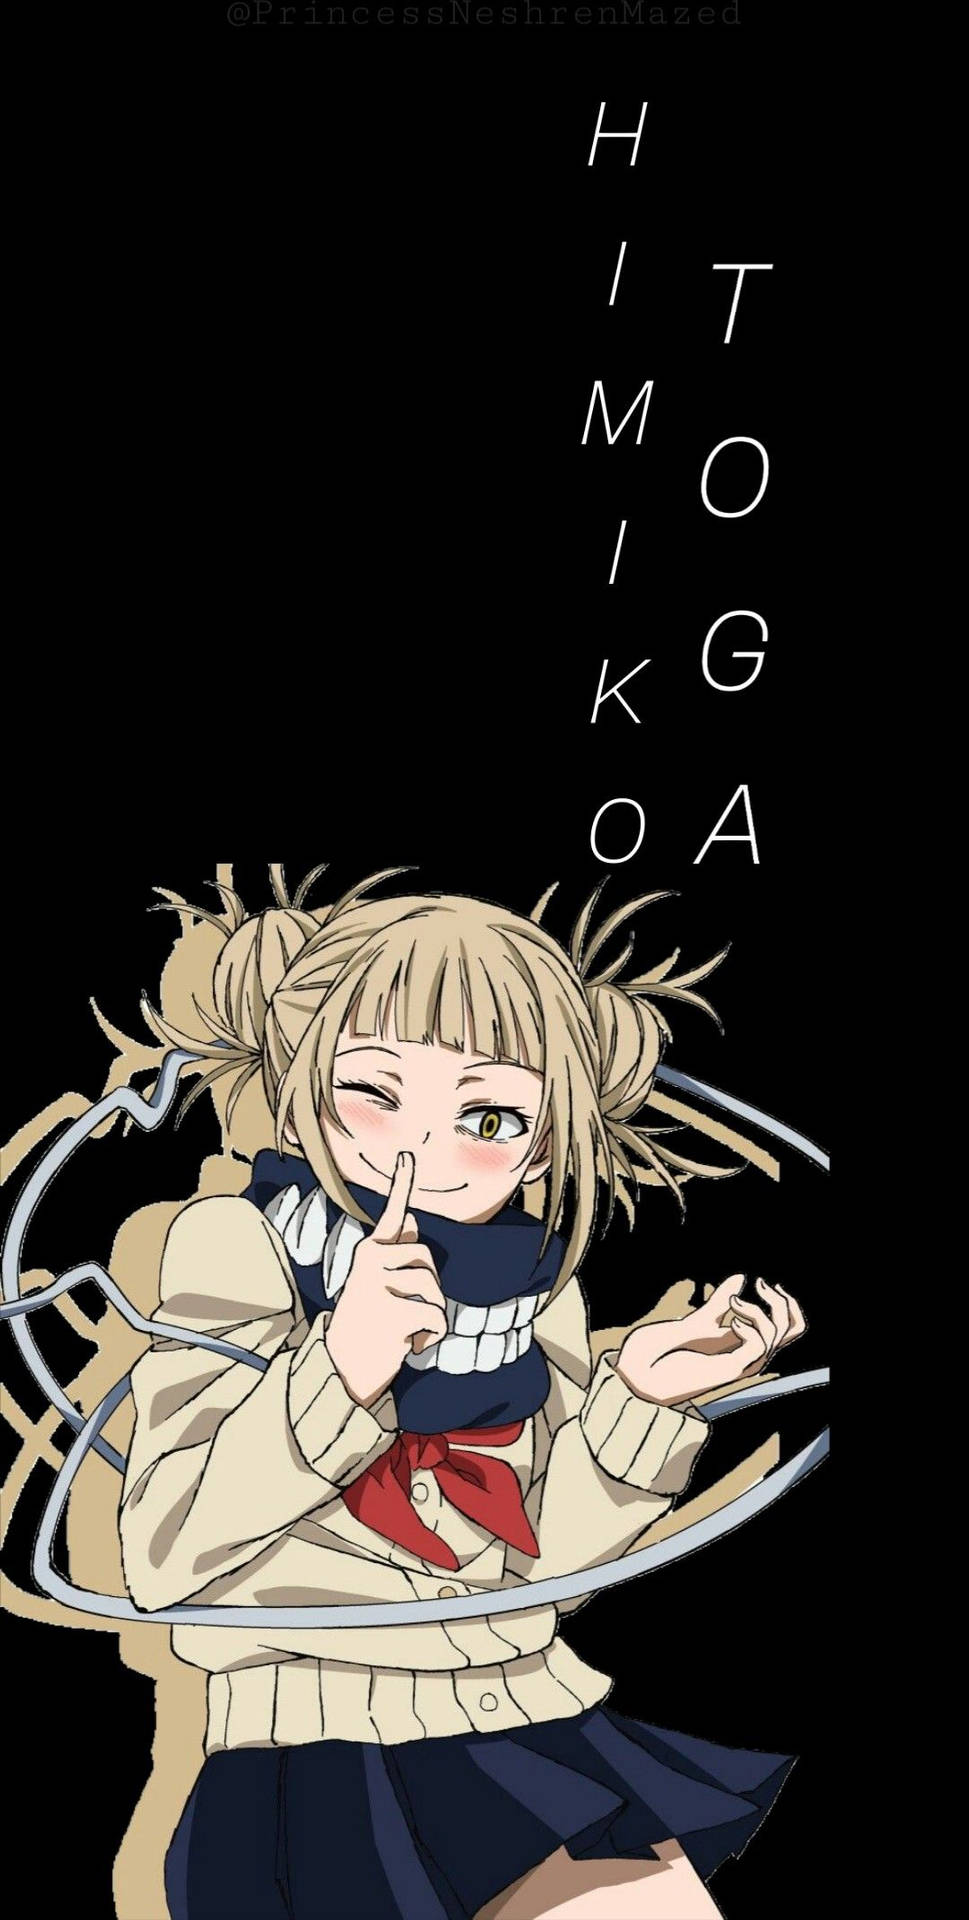 1080X2141 Himiko Toga Wallpaper and Background